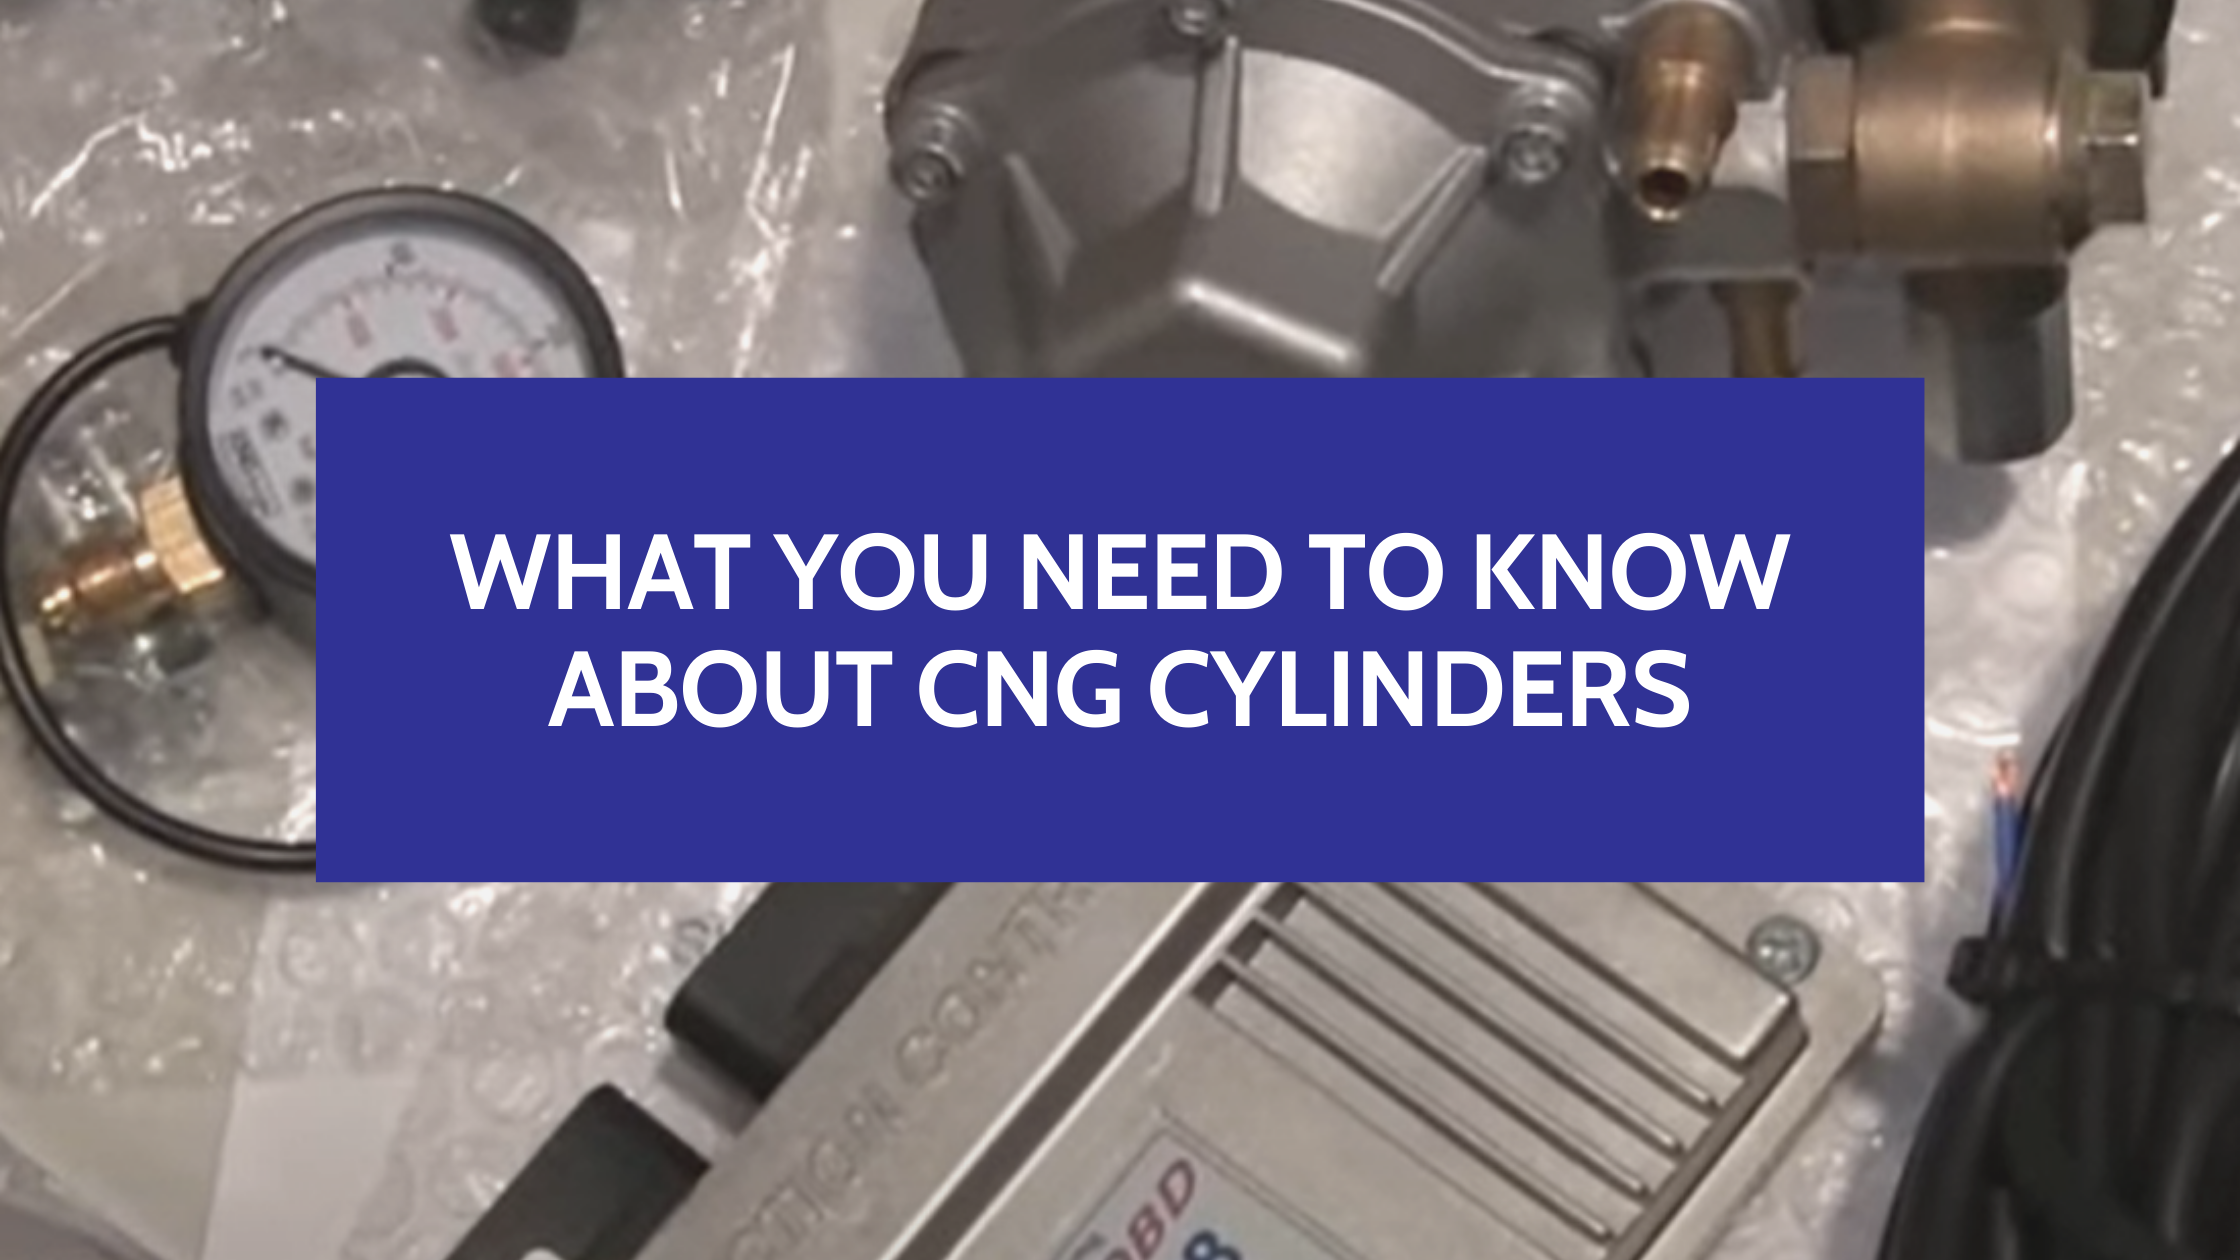 What You Need To Know About CNG Cylinders